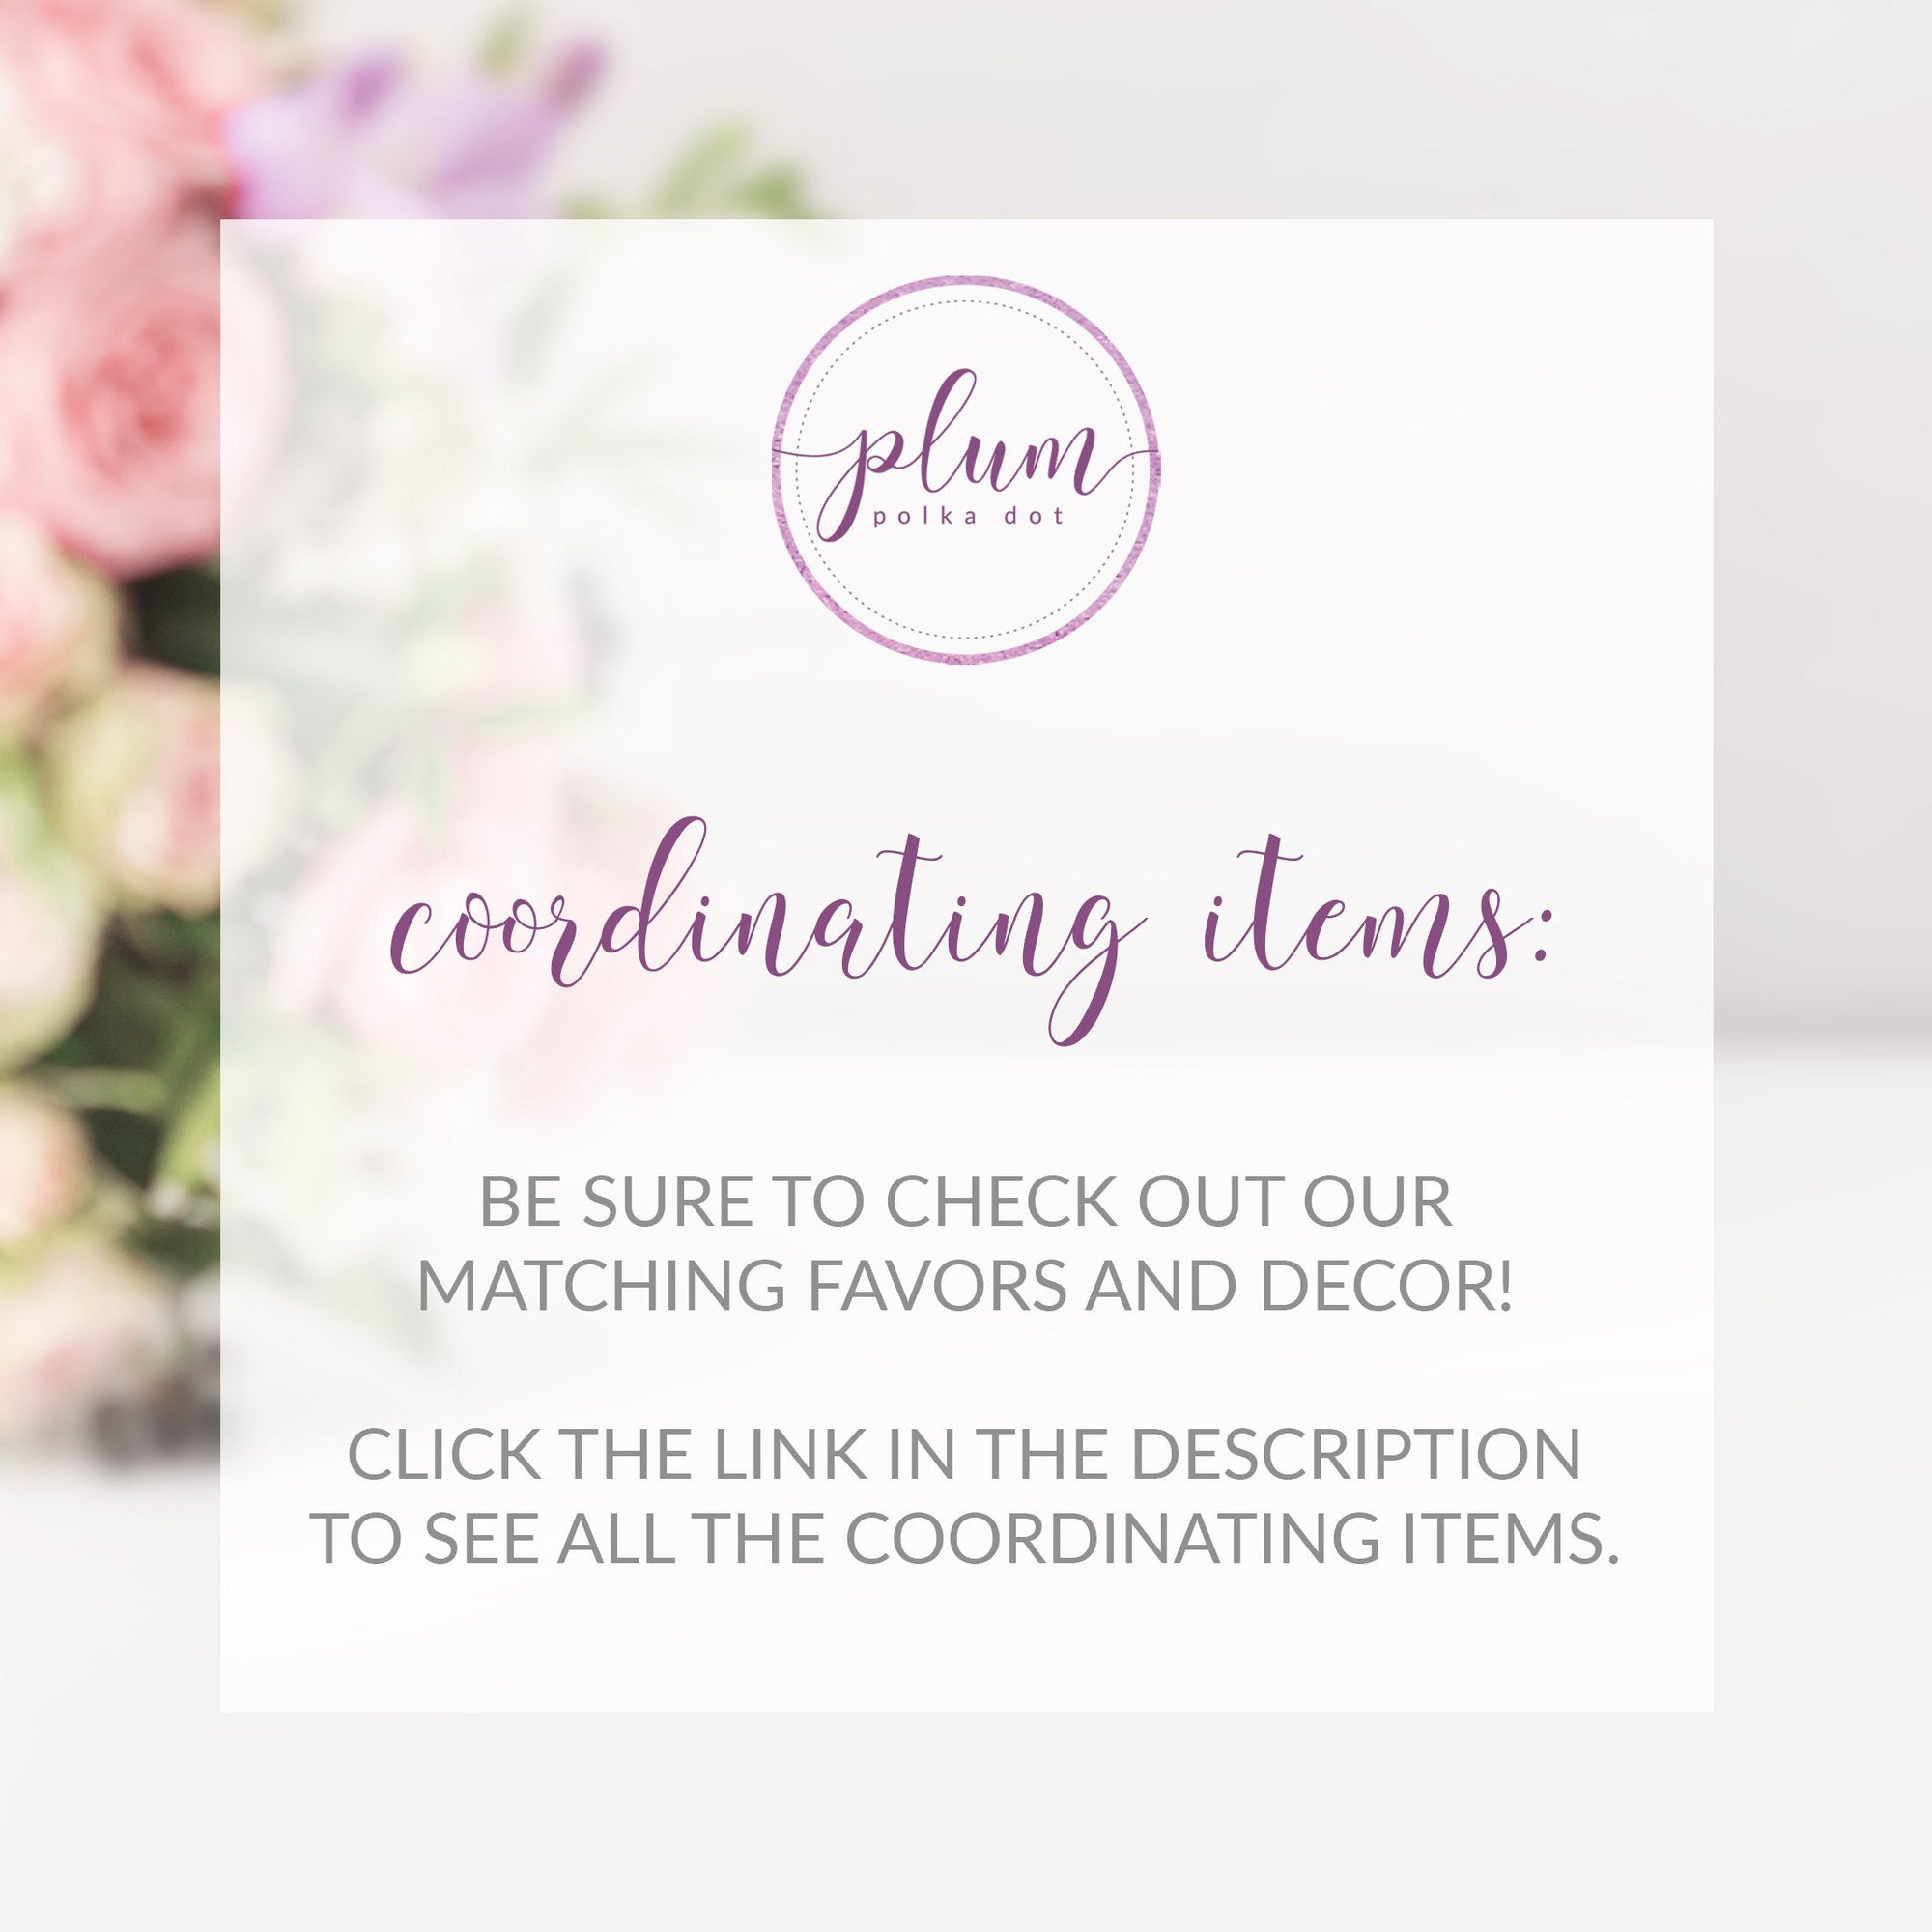 Dark Blue Save The Date Card Template, Watercolor Editable Wedding Engagement Announcement, Moody Save The Date Printable, 5x7 - MB100